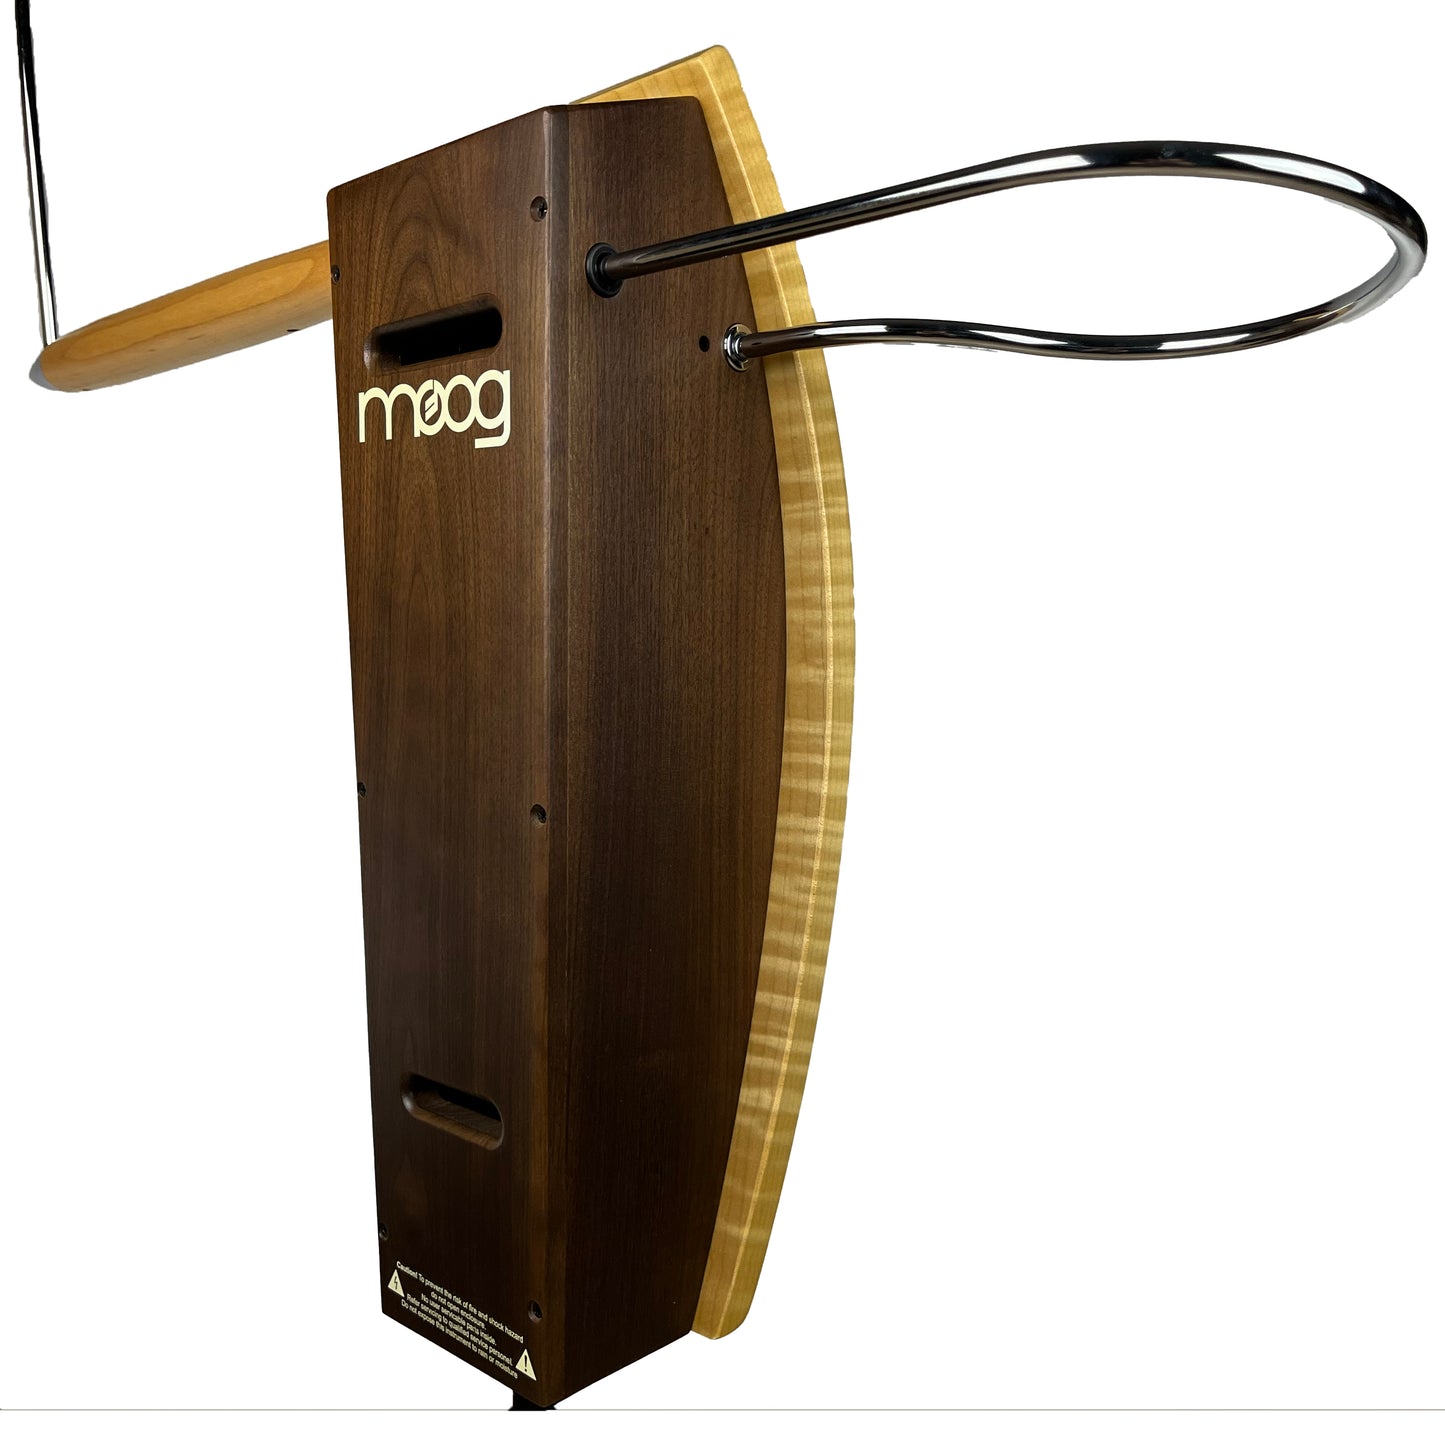 Moog Etherwave Pro Theremin, brand new, old stock (N.O.S.)